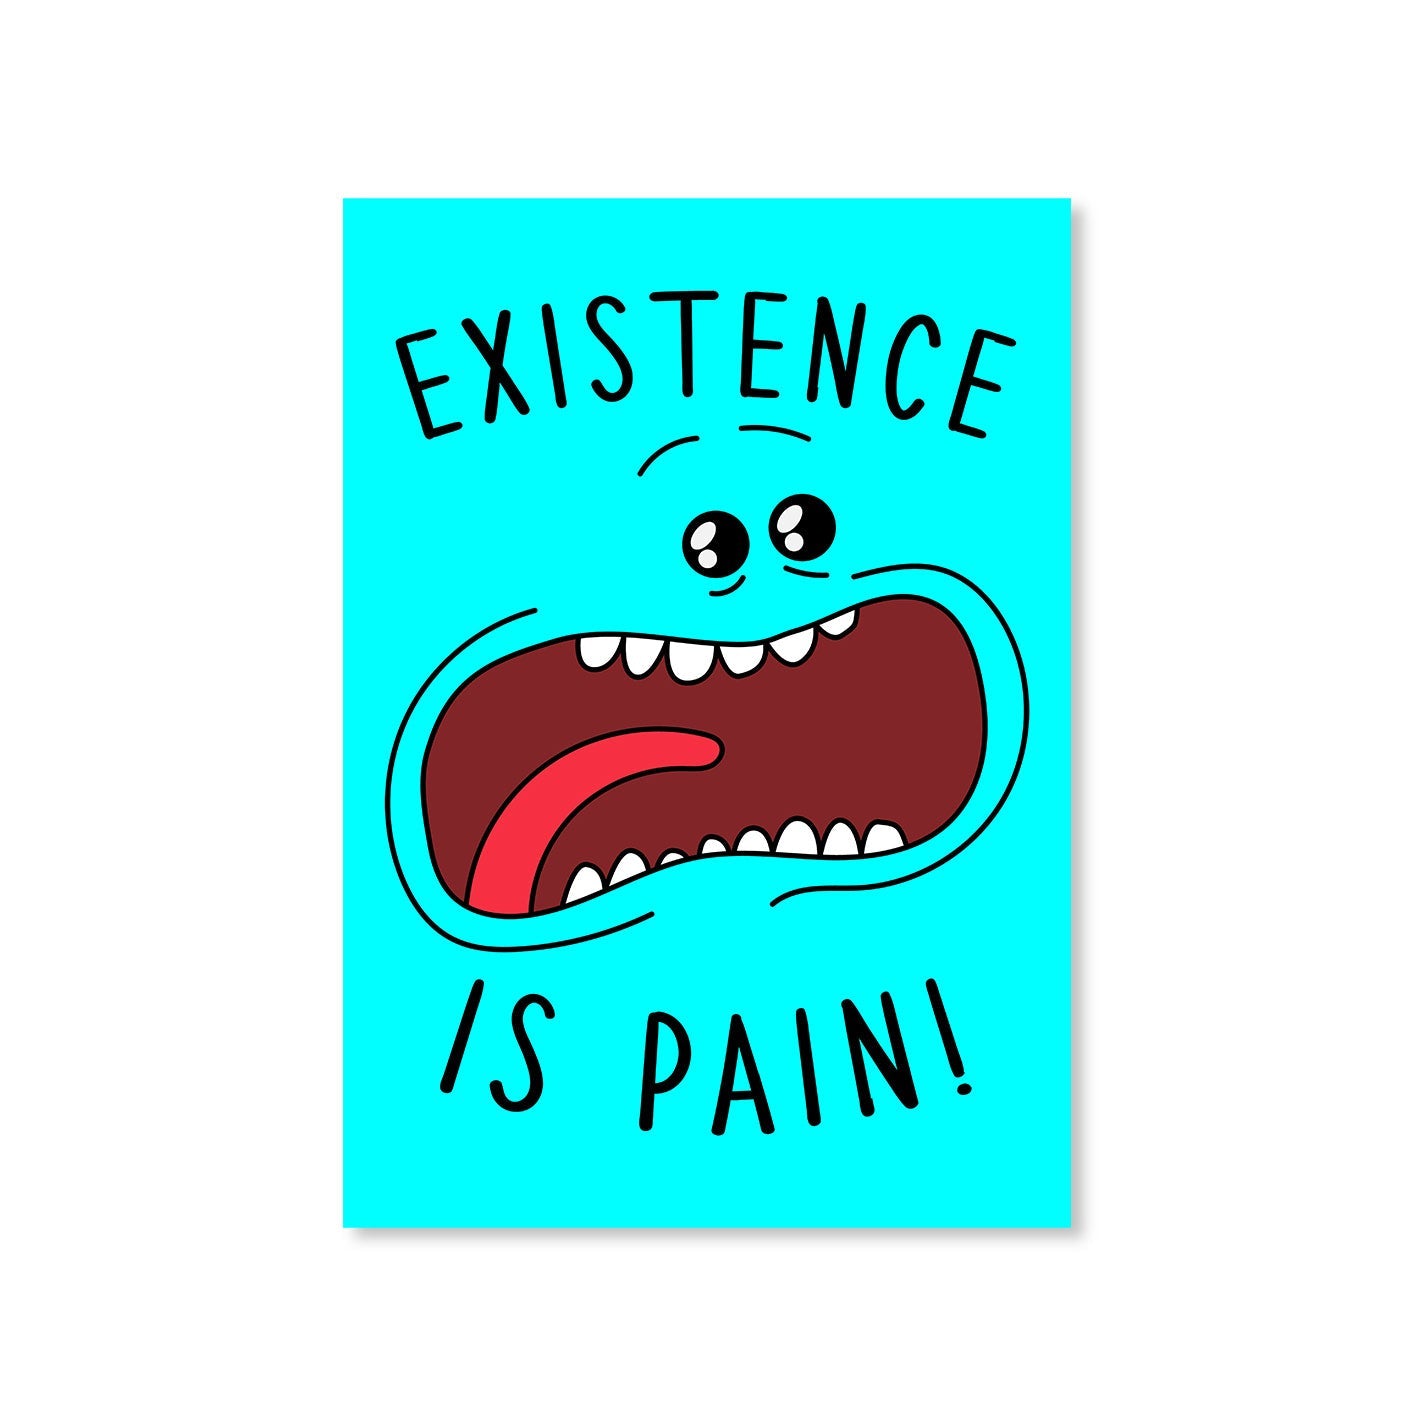 rick and morty existence is pain poster wall art buy online india the banyan tee tbt a4 rick and morty online summer beth mr meeseeks jerry quote vector art clothing accessories merchandise